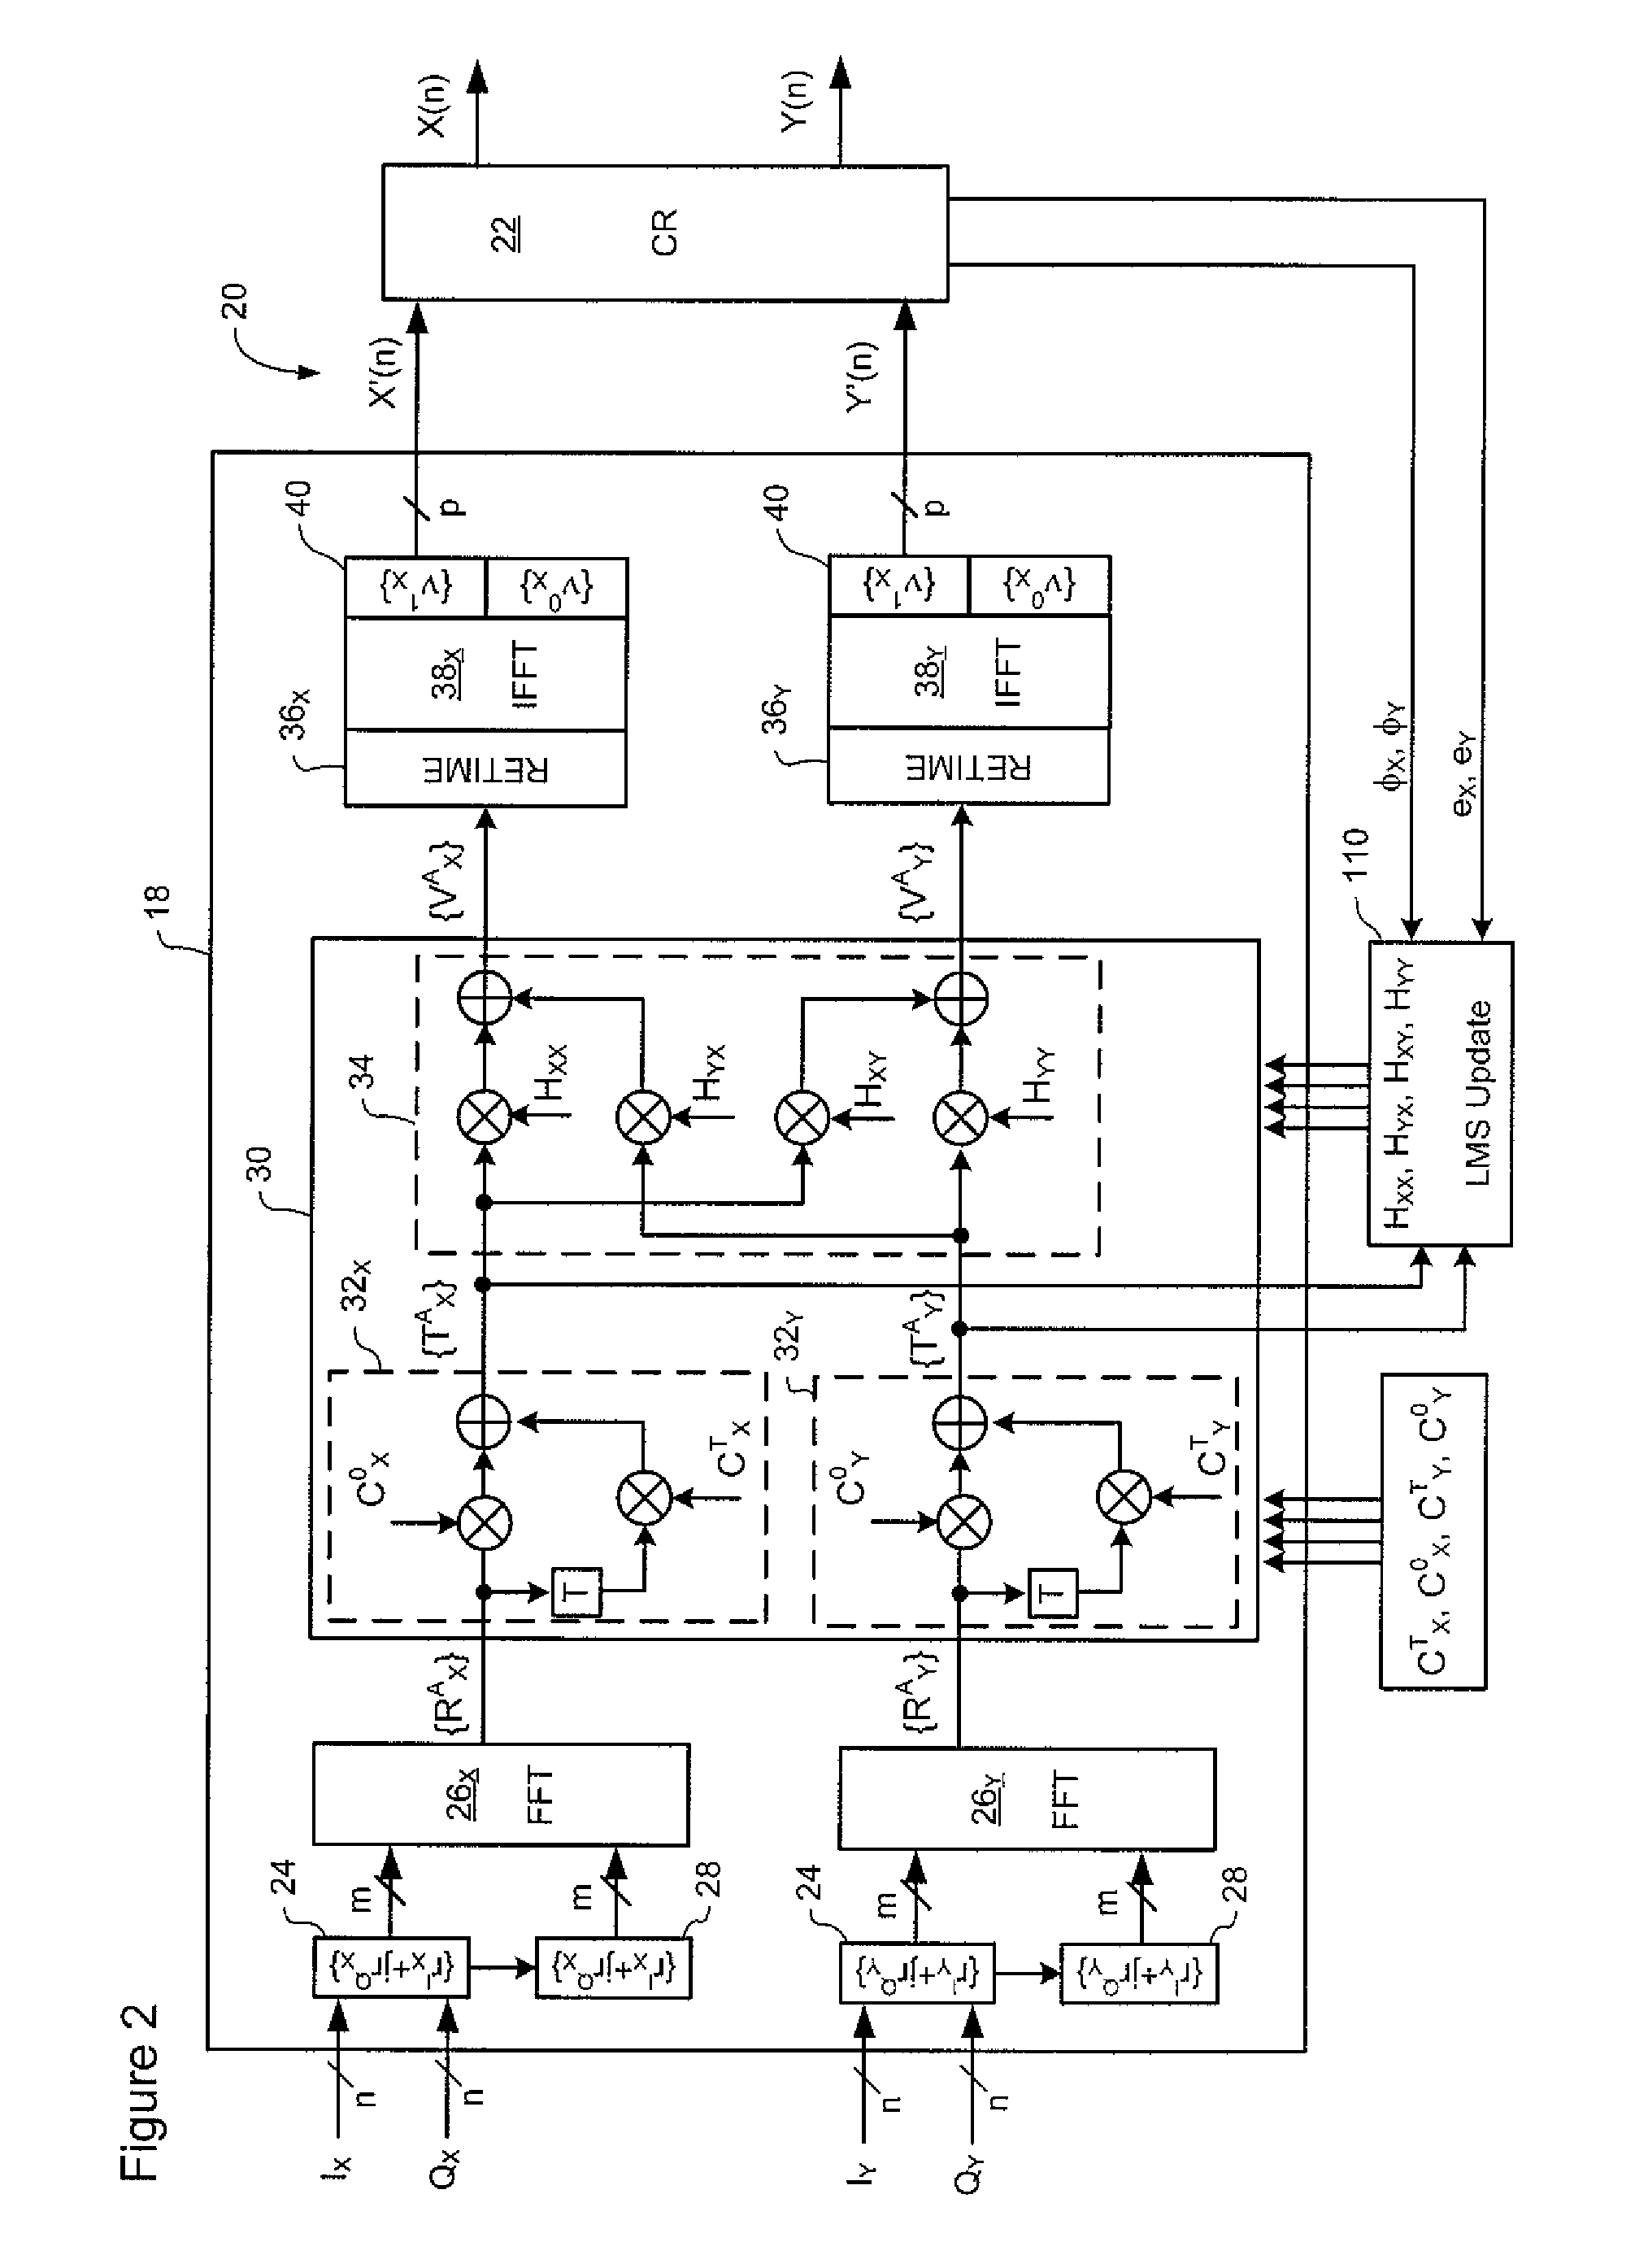 Soft thermal failure in a high capacity transmission system